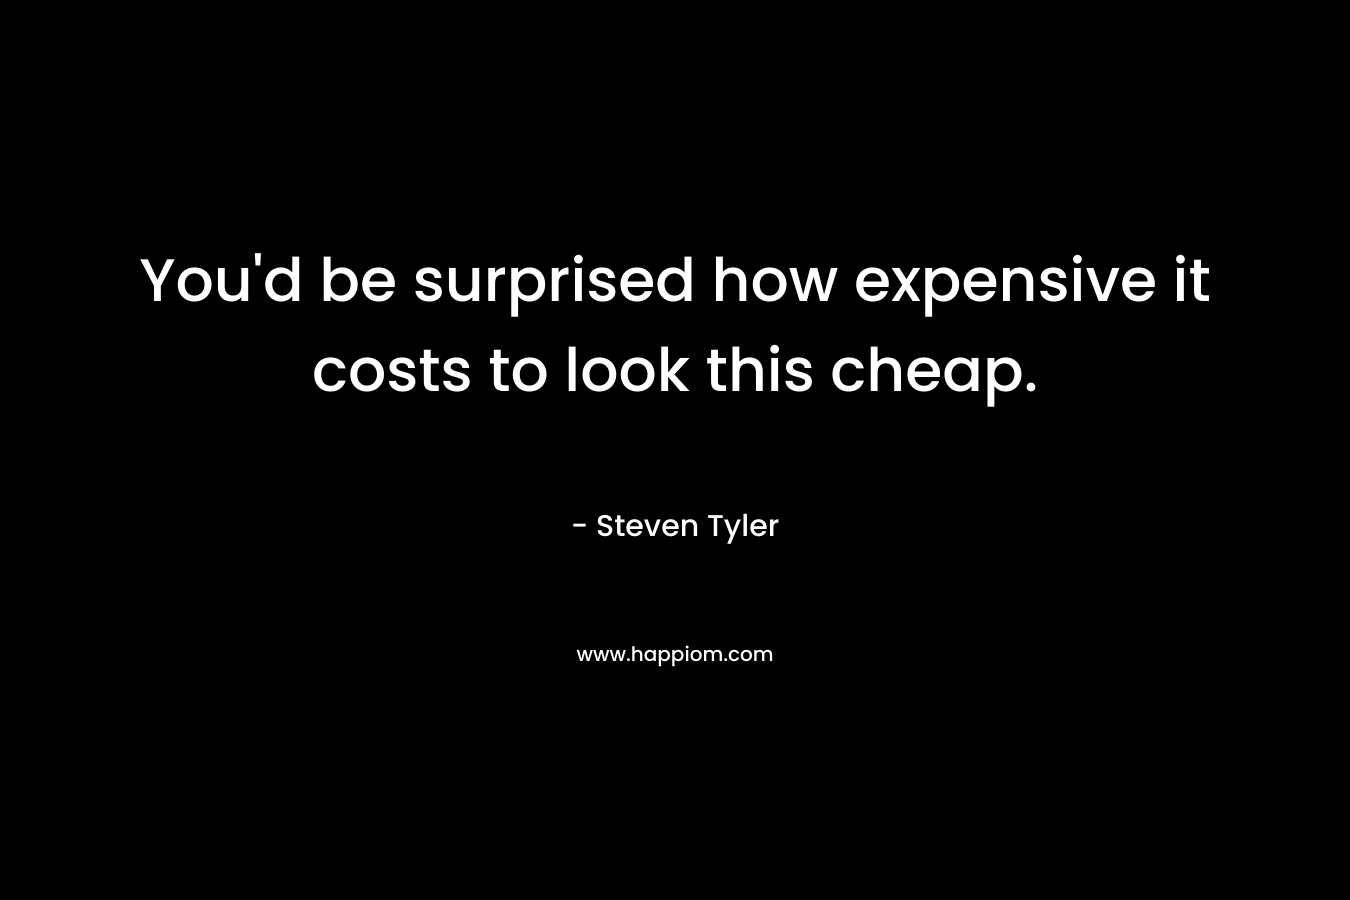 You’d be surprised how expensive it costs to look this cheap. – Steven Tyler